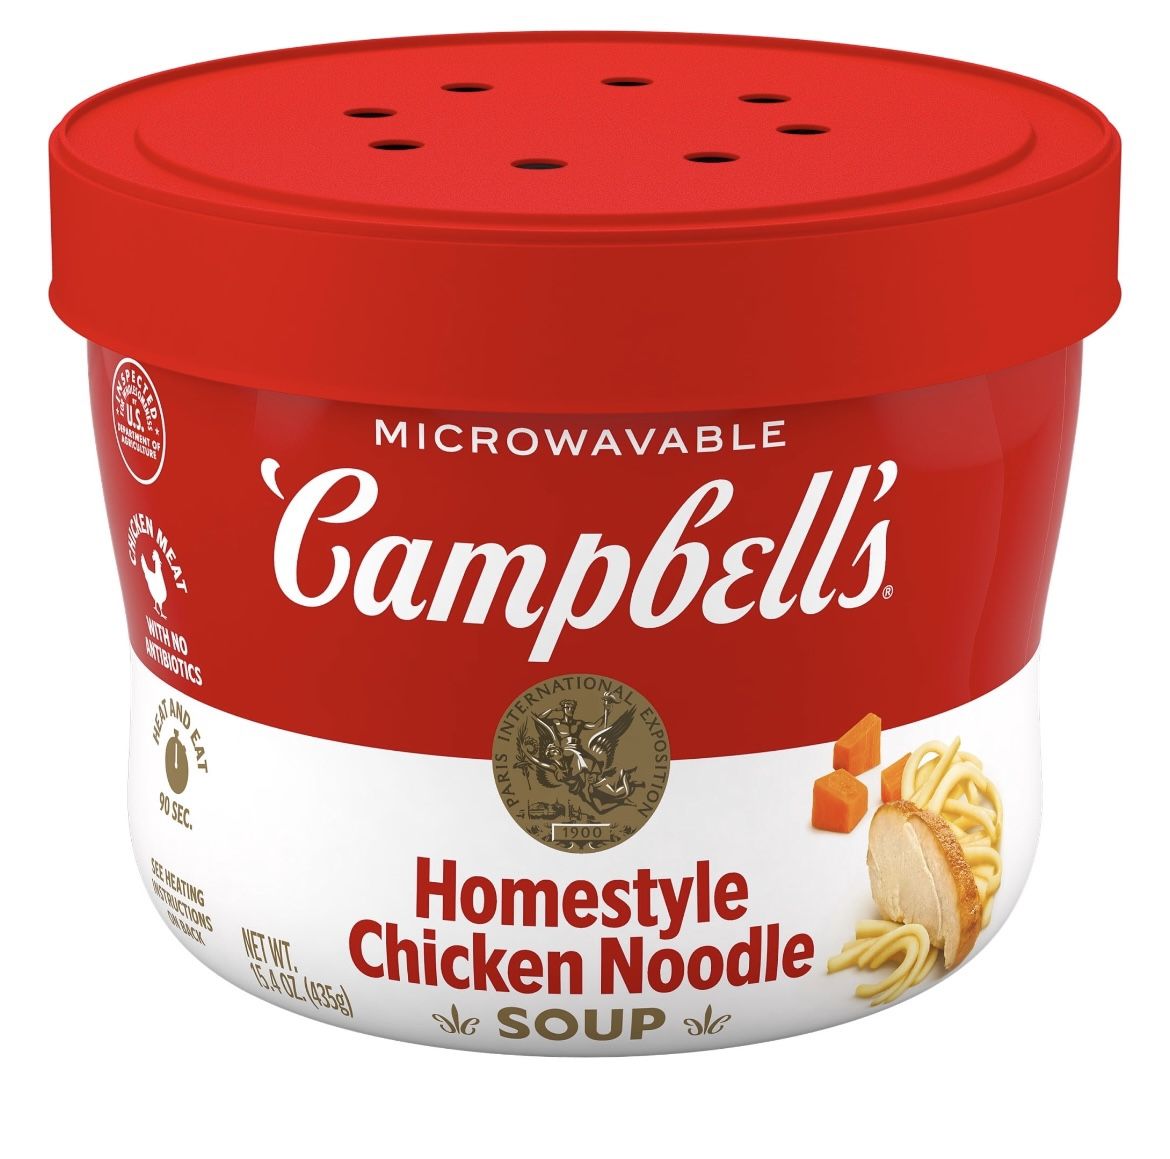 Campbells Homestyle Chicken Noodle